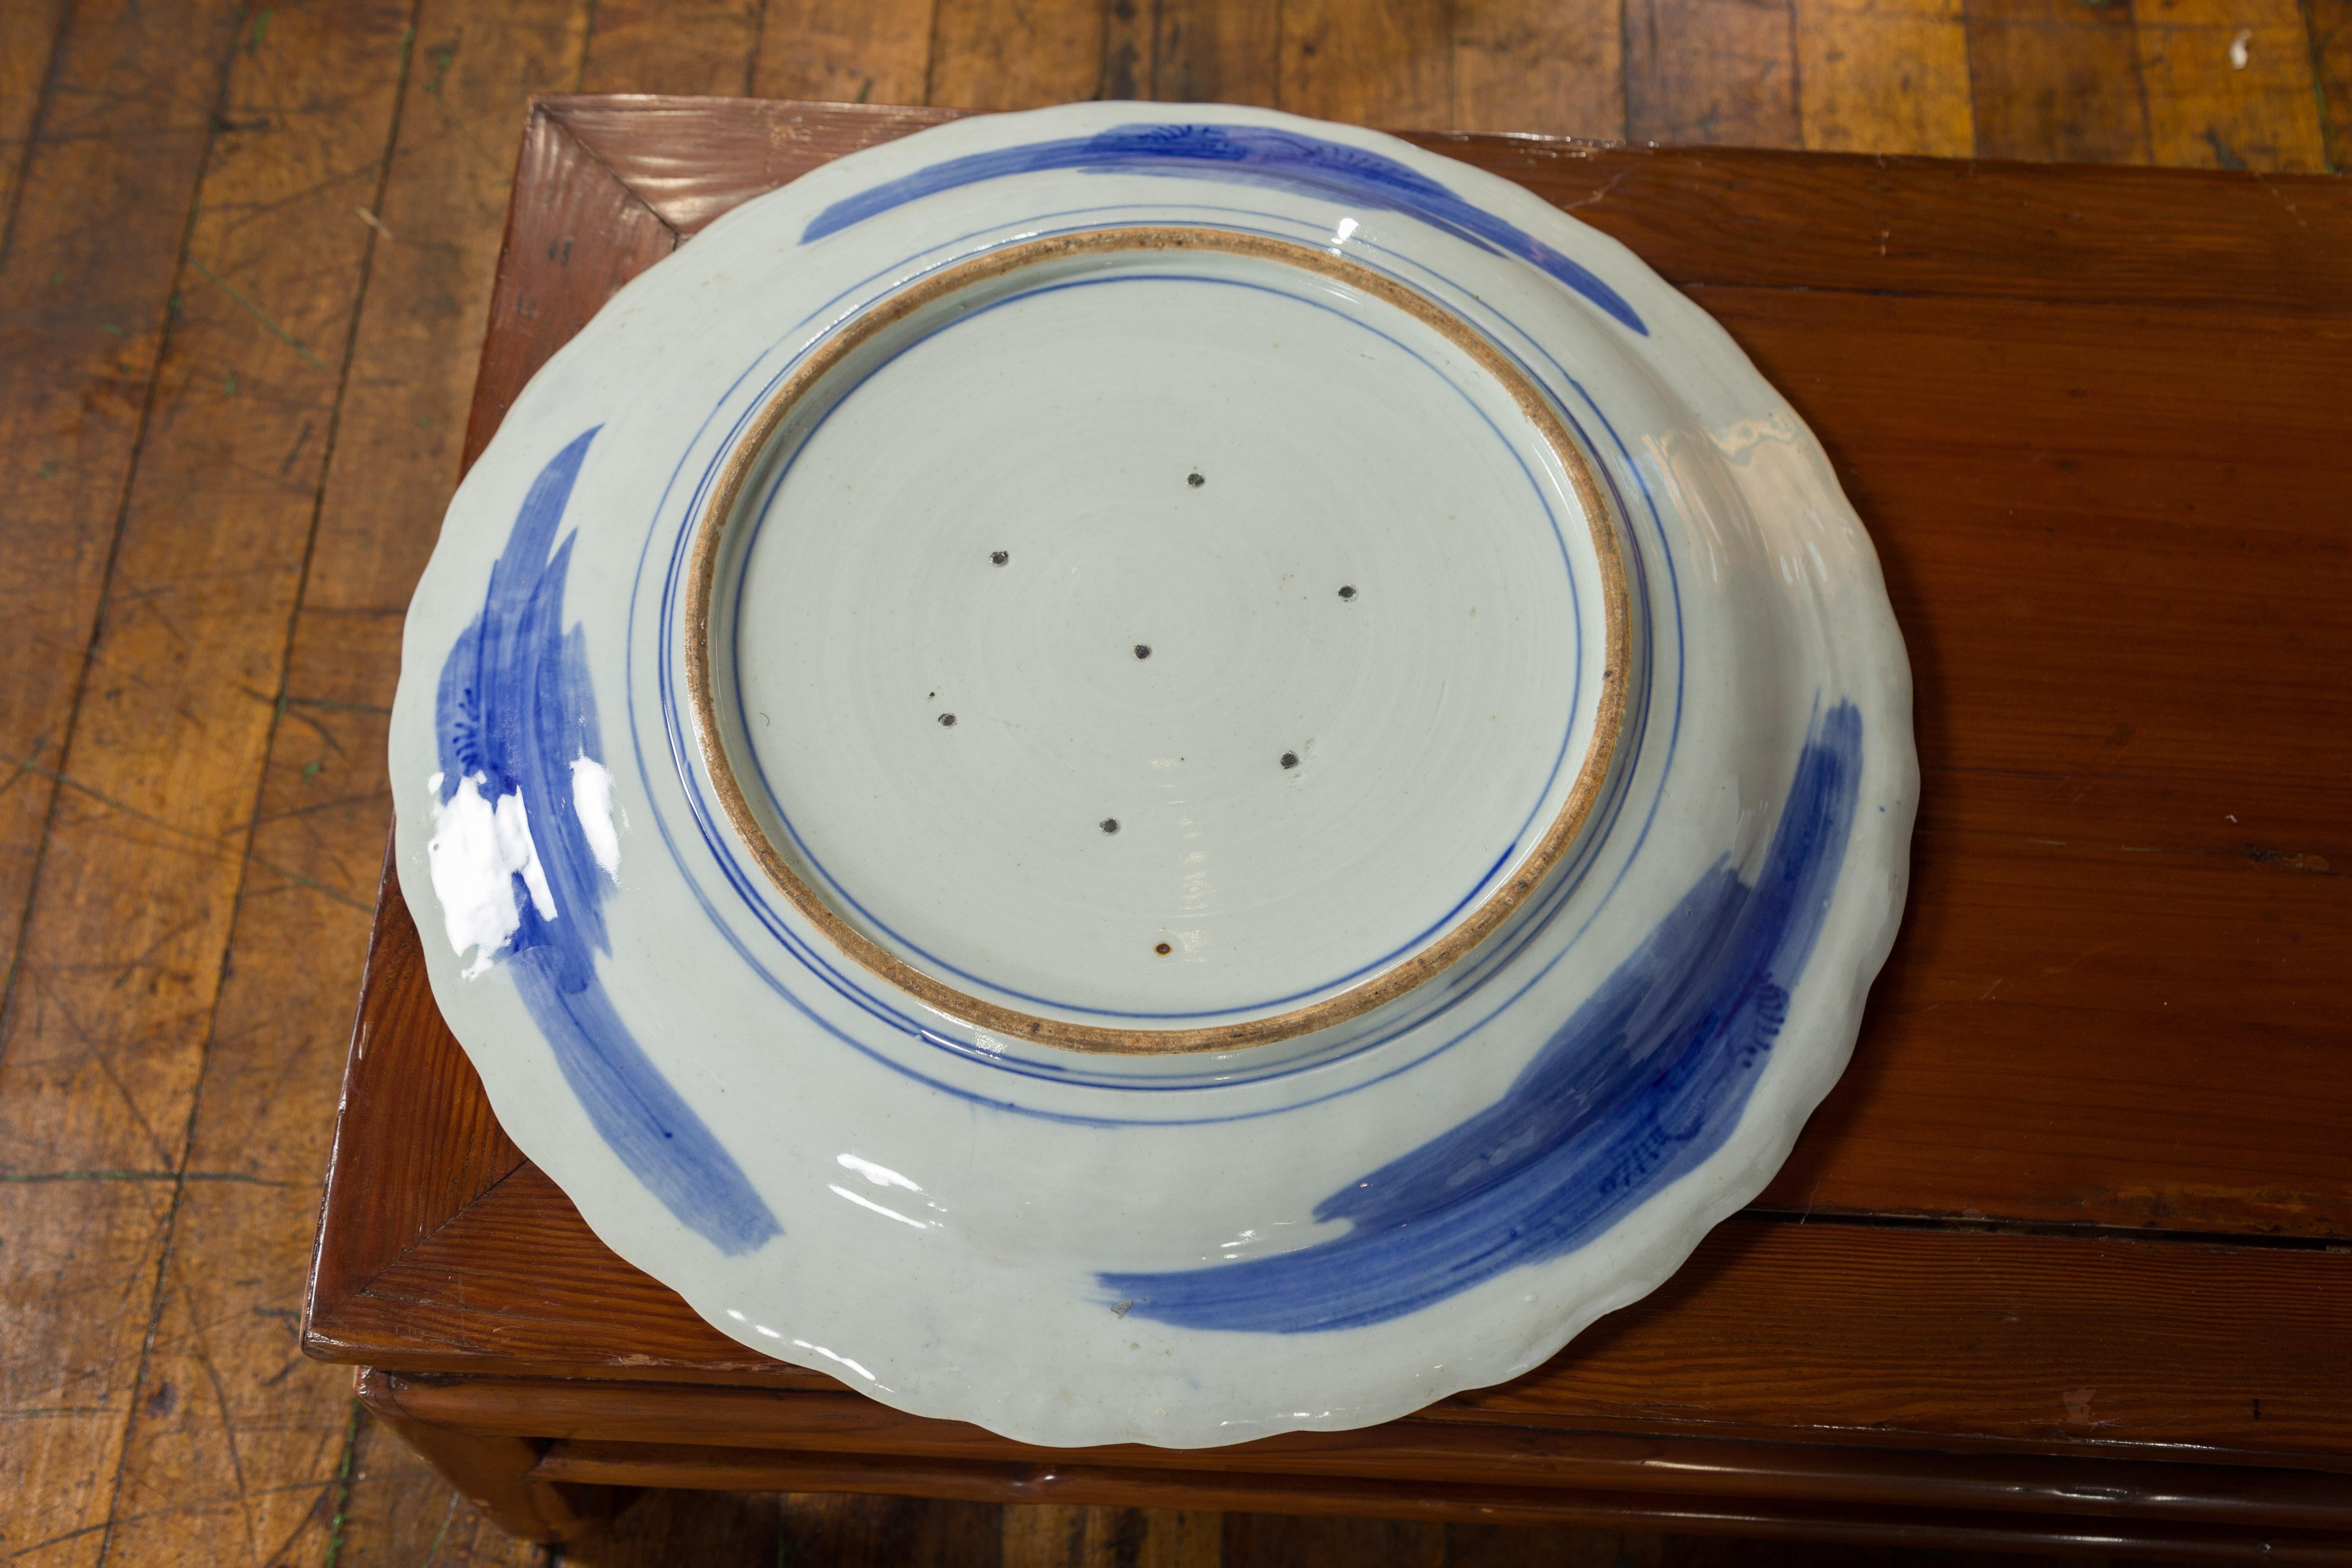 Japanese Blue and White Hand-Painted Porcelain Charger Plate with Foliage Décor For Sale 1